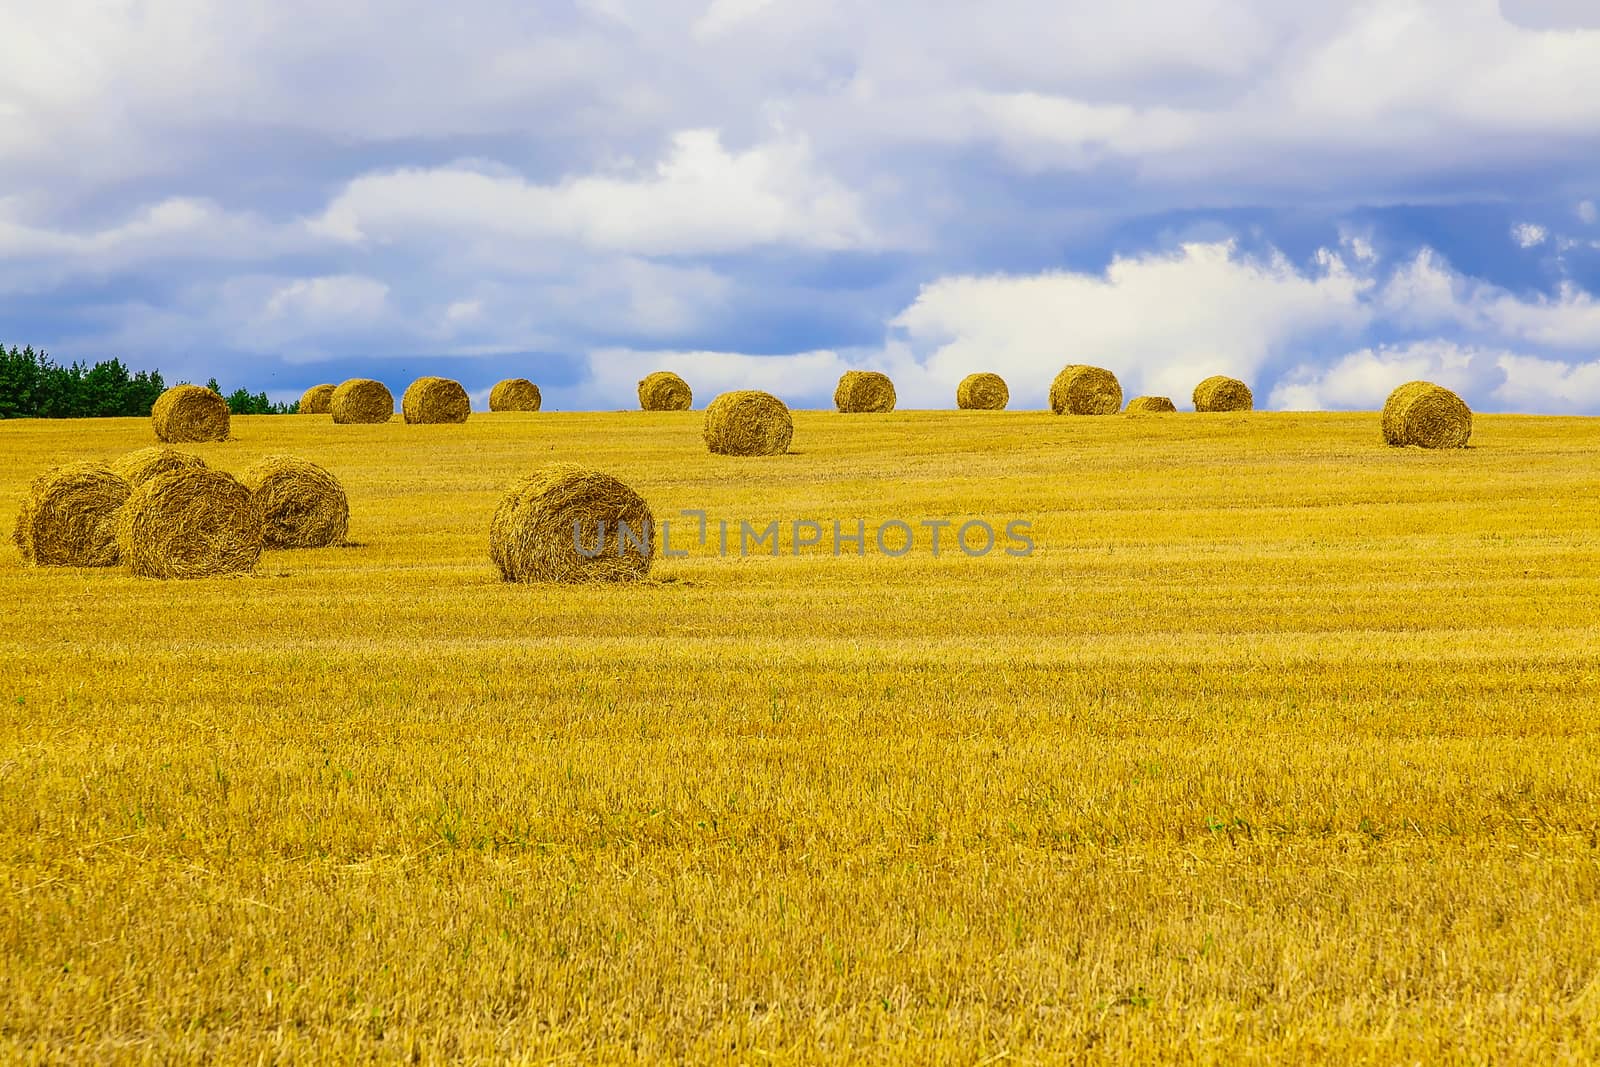 Yellow and Round Straw Bales in a Stubble Field at end of Summer at Day with Clouds, Blue Sky after Harvest